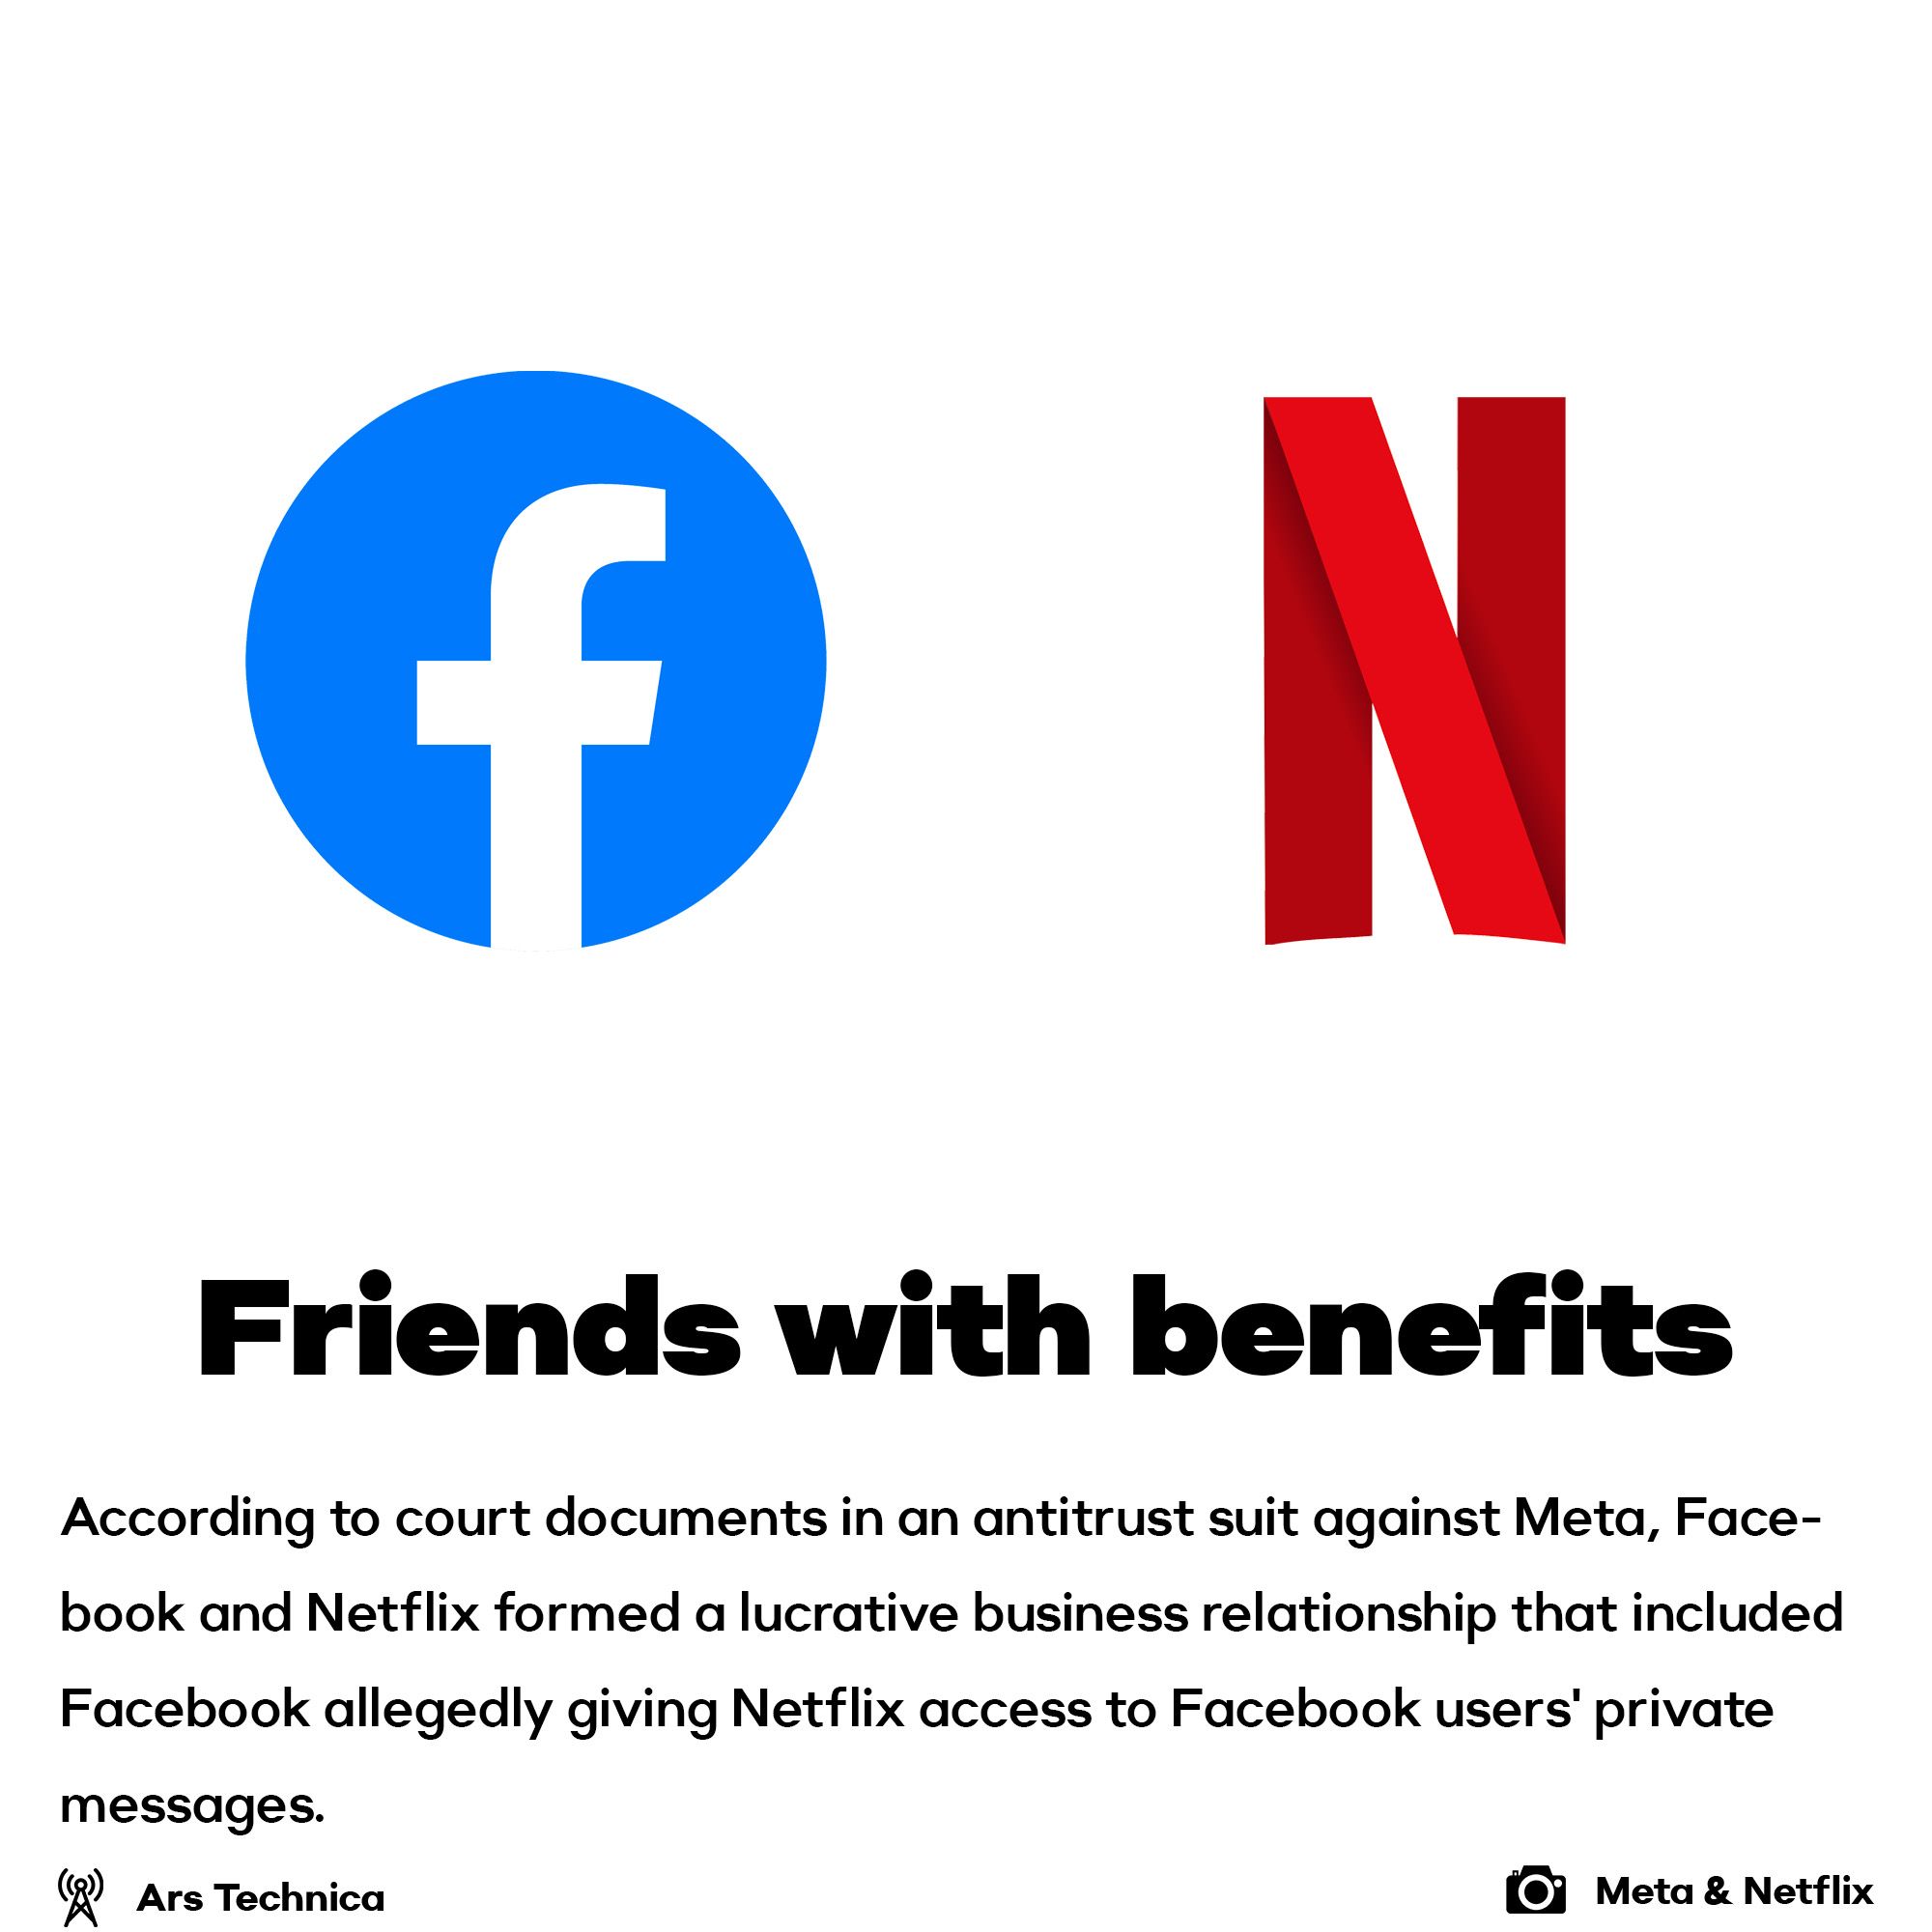 Facebook and Netflix had questionable cooperation 